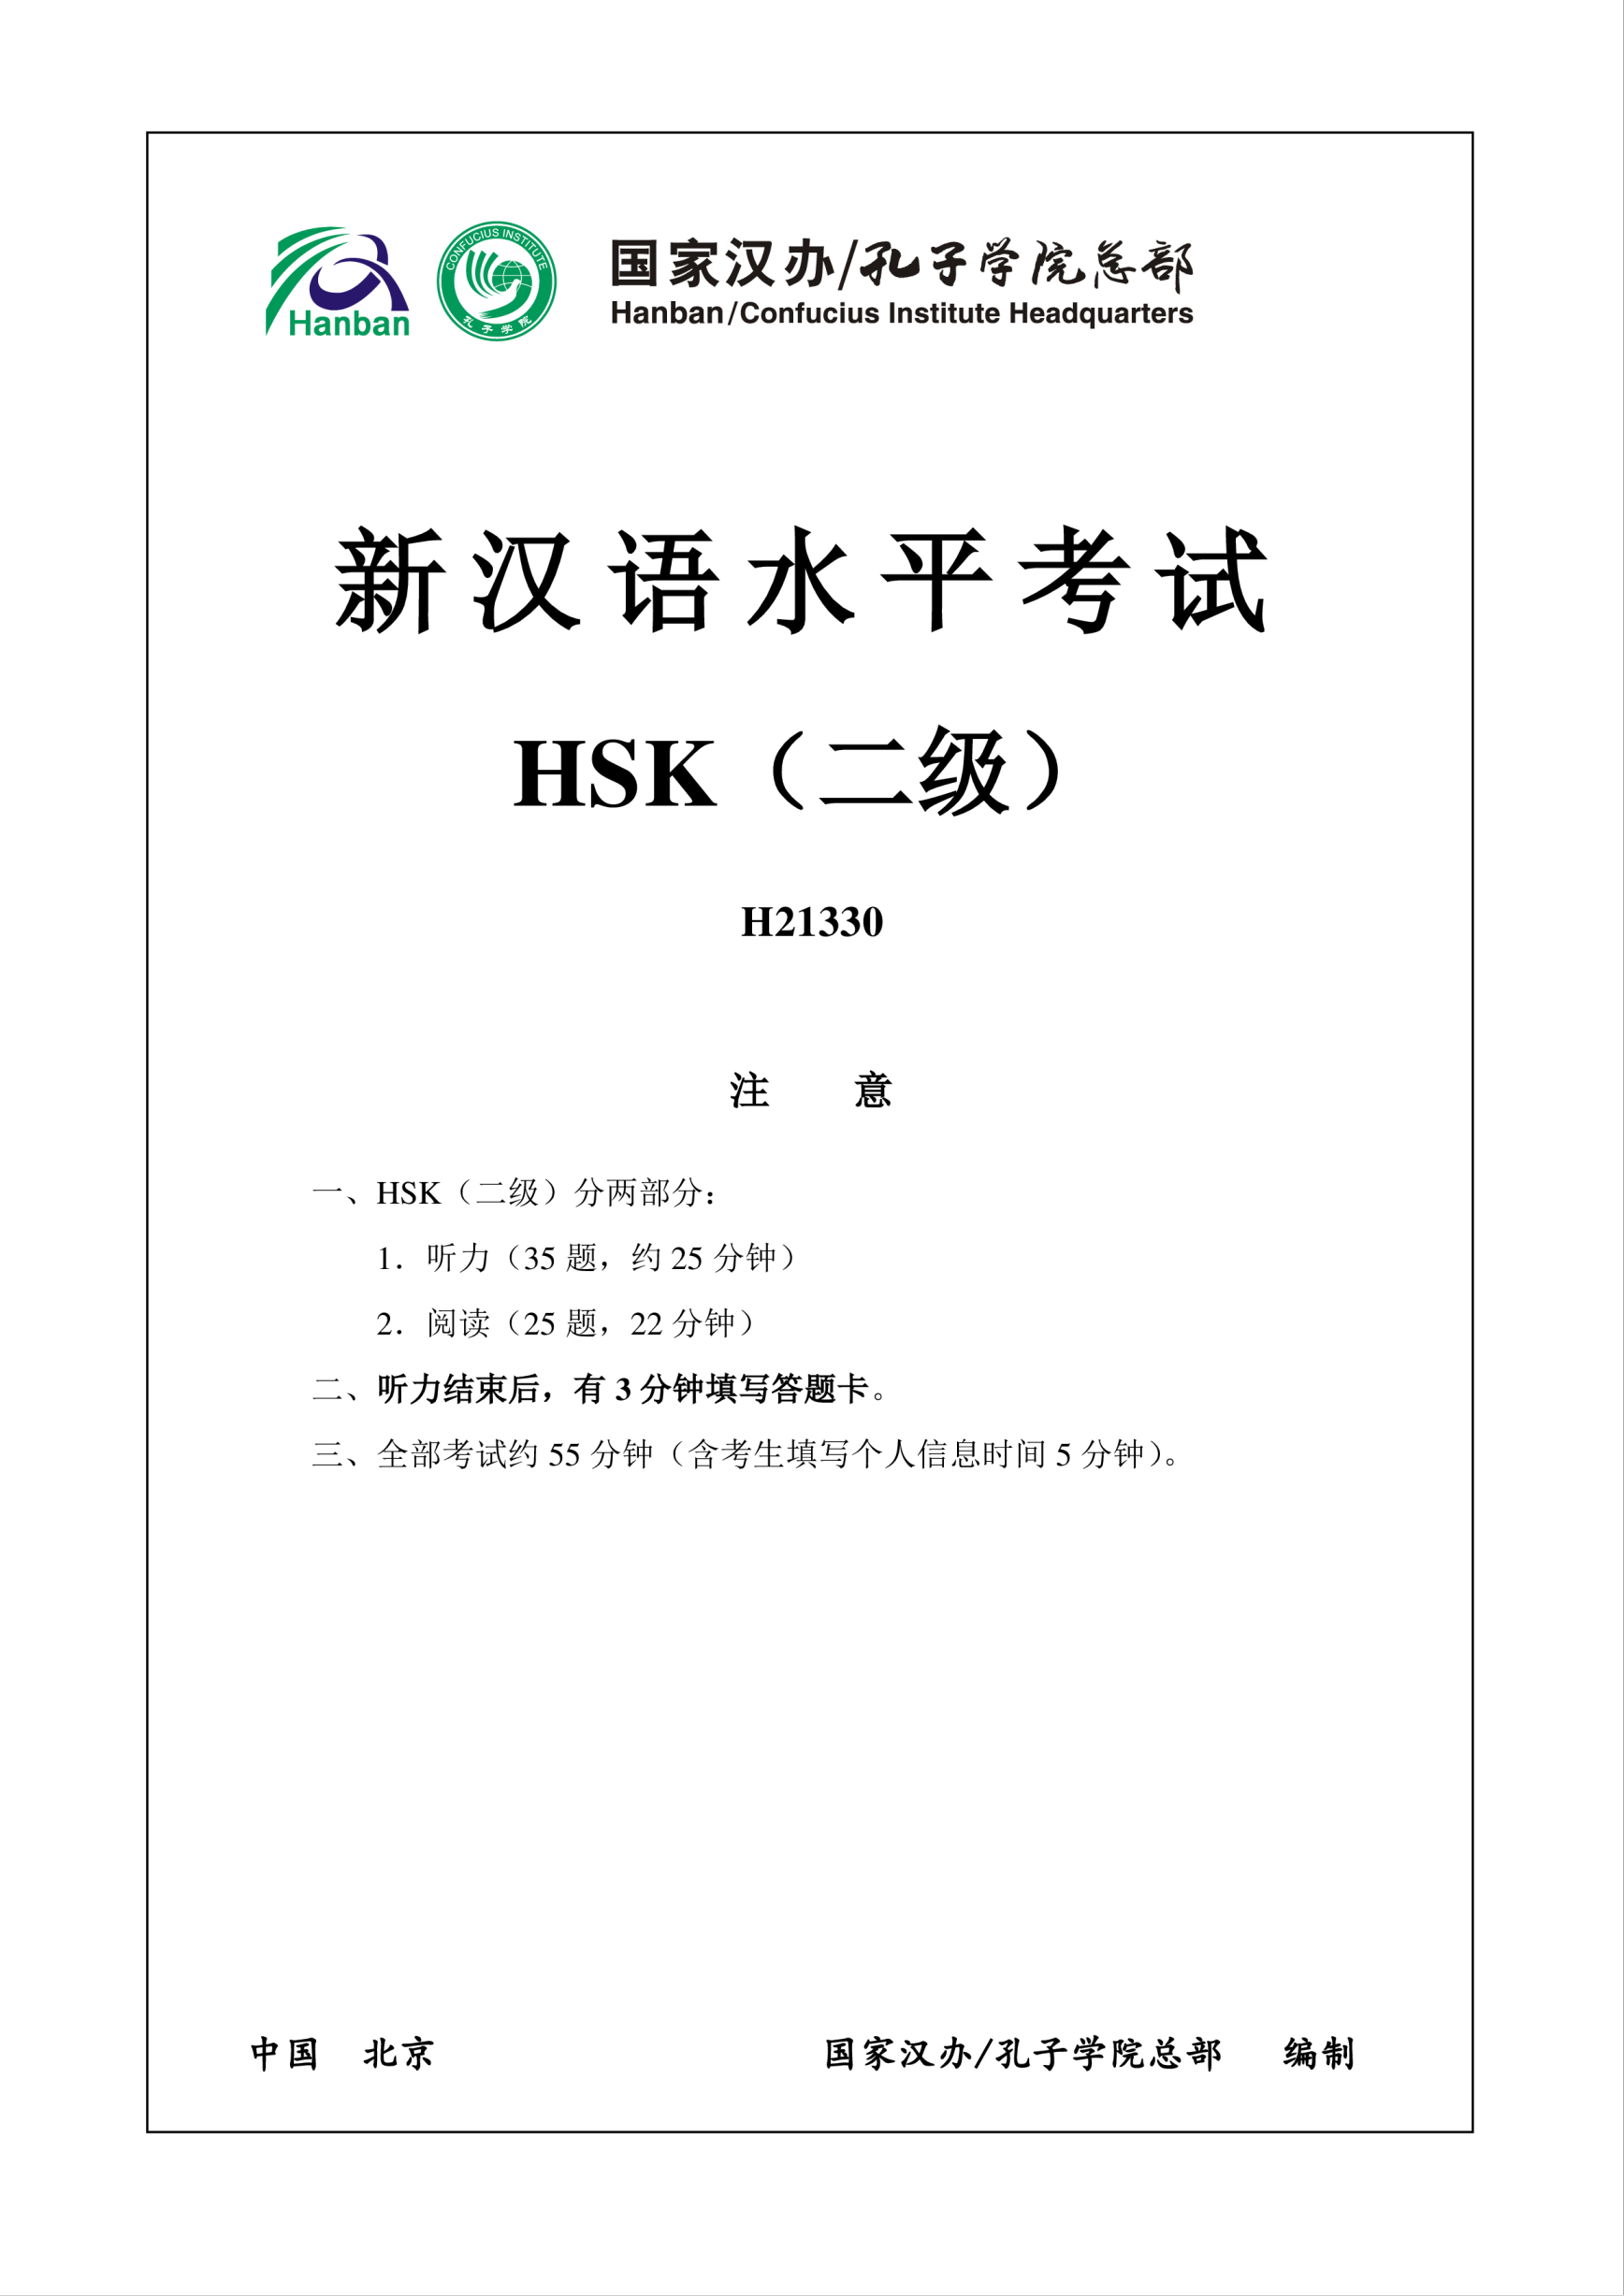 template preview imageHSK2 H21330 Chinese Exam including Answers, Audio